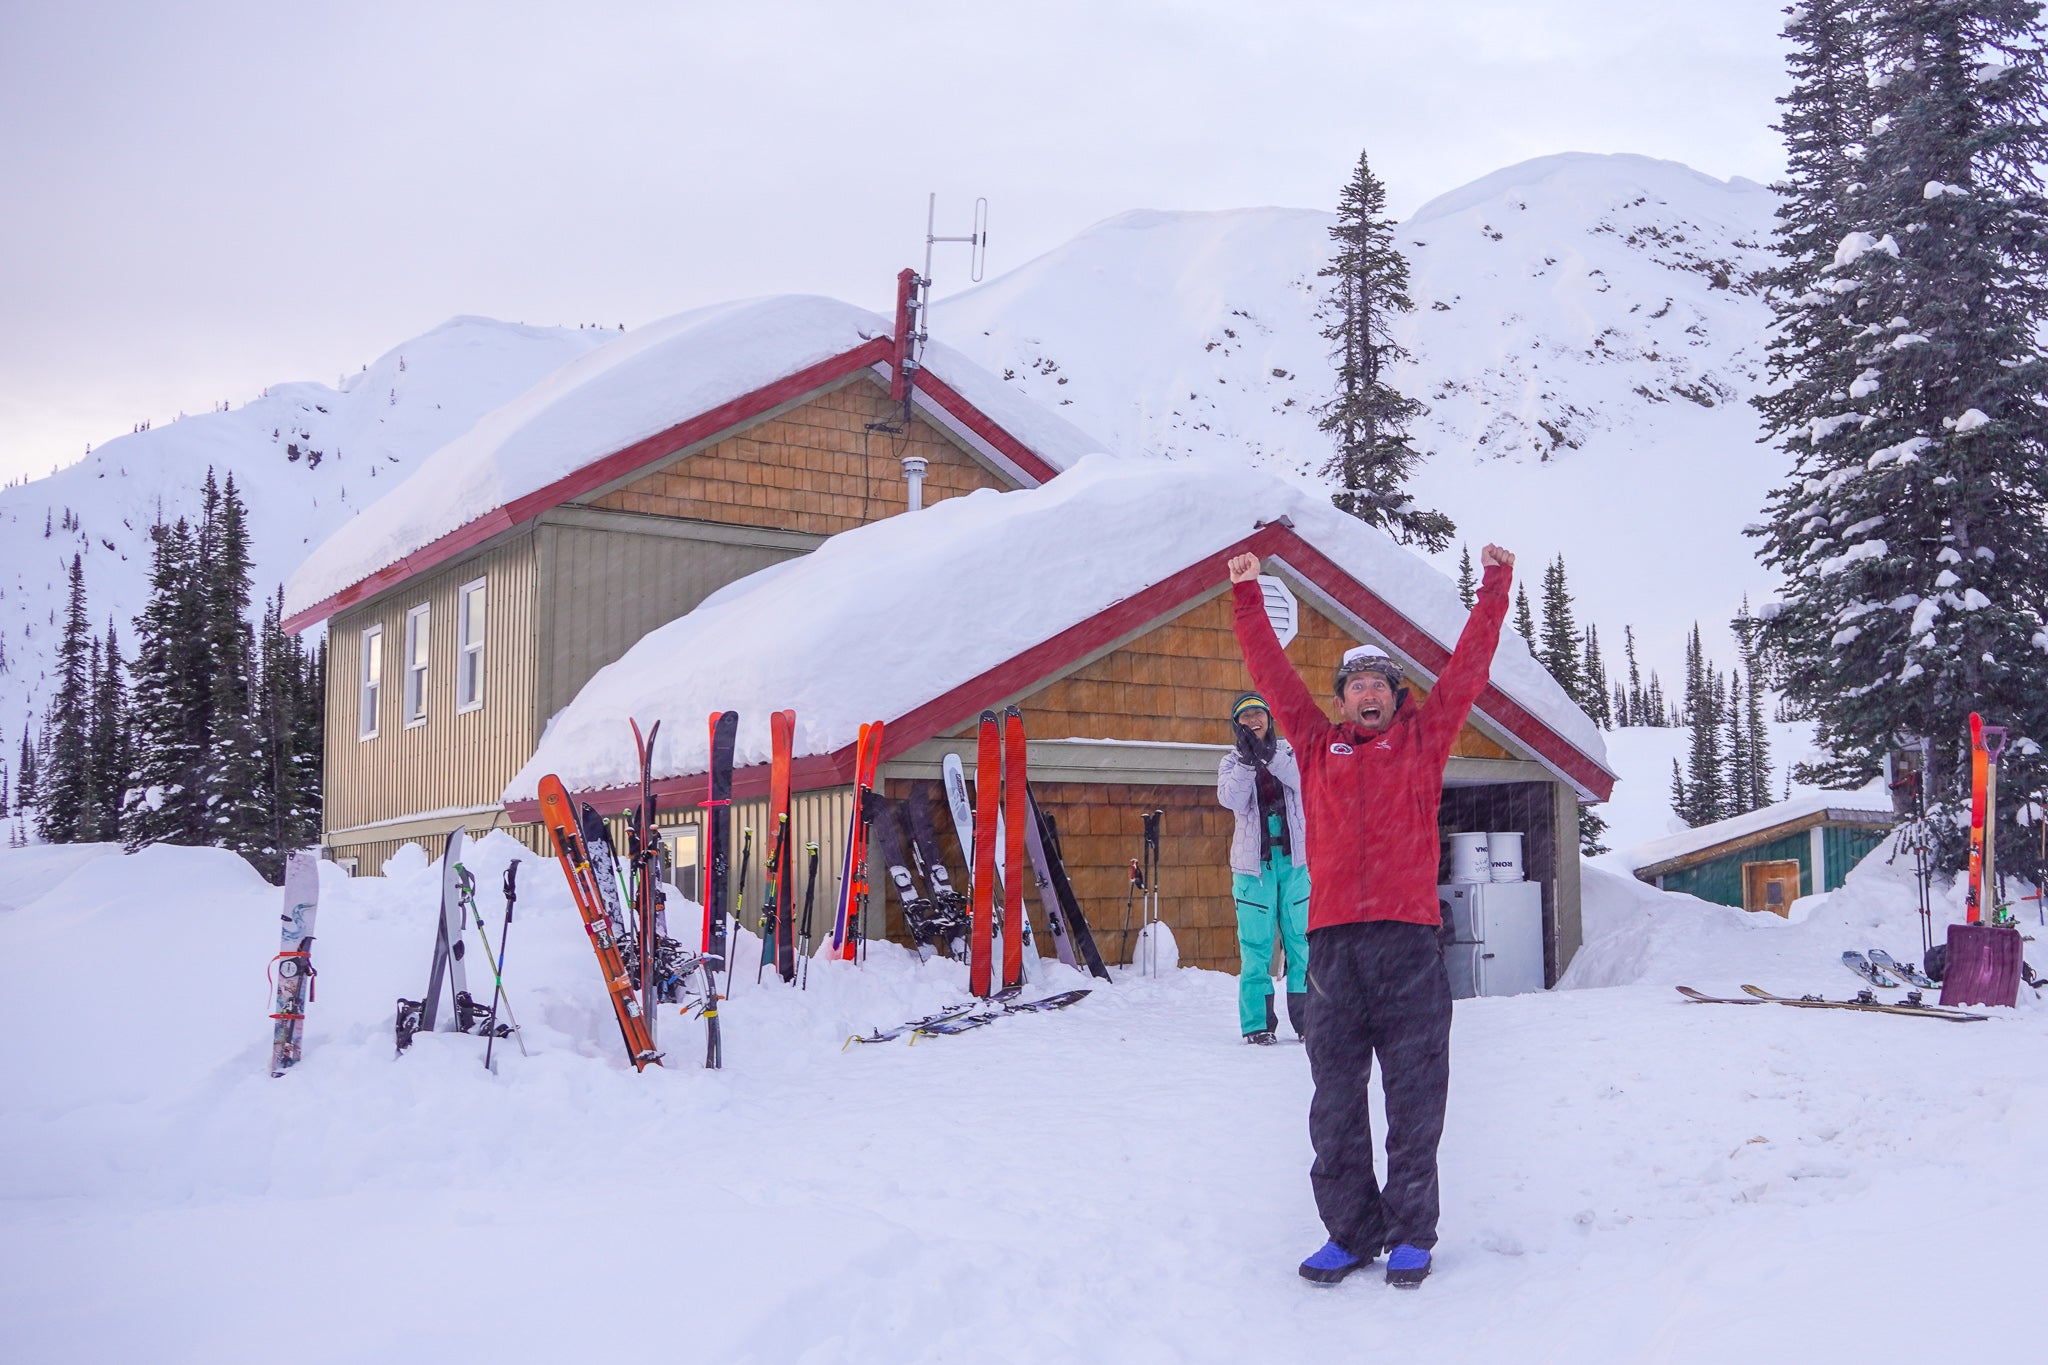 Arriving at a backcountry ski Lodge in British Columbia